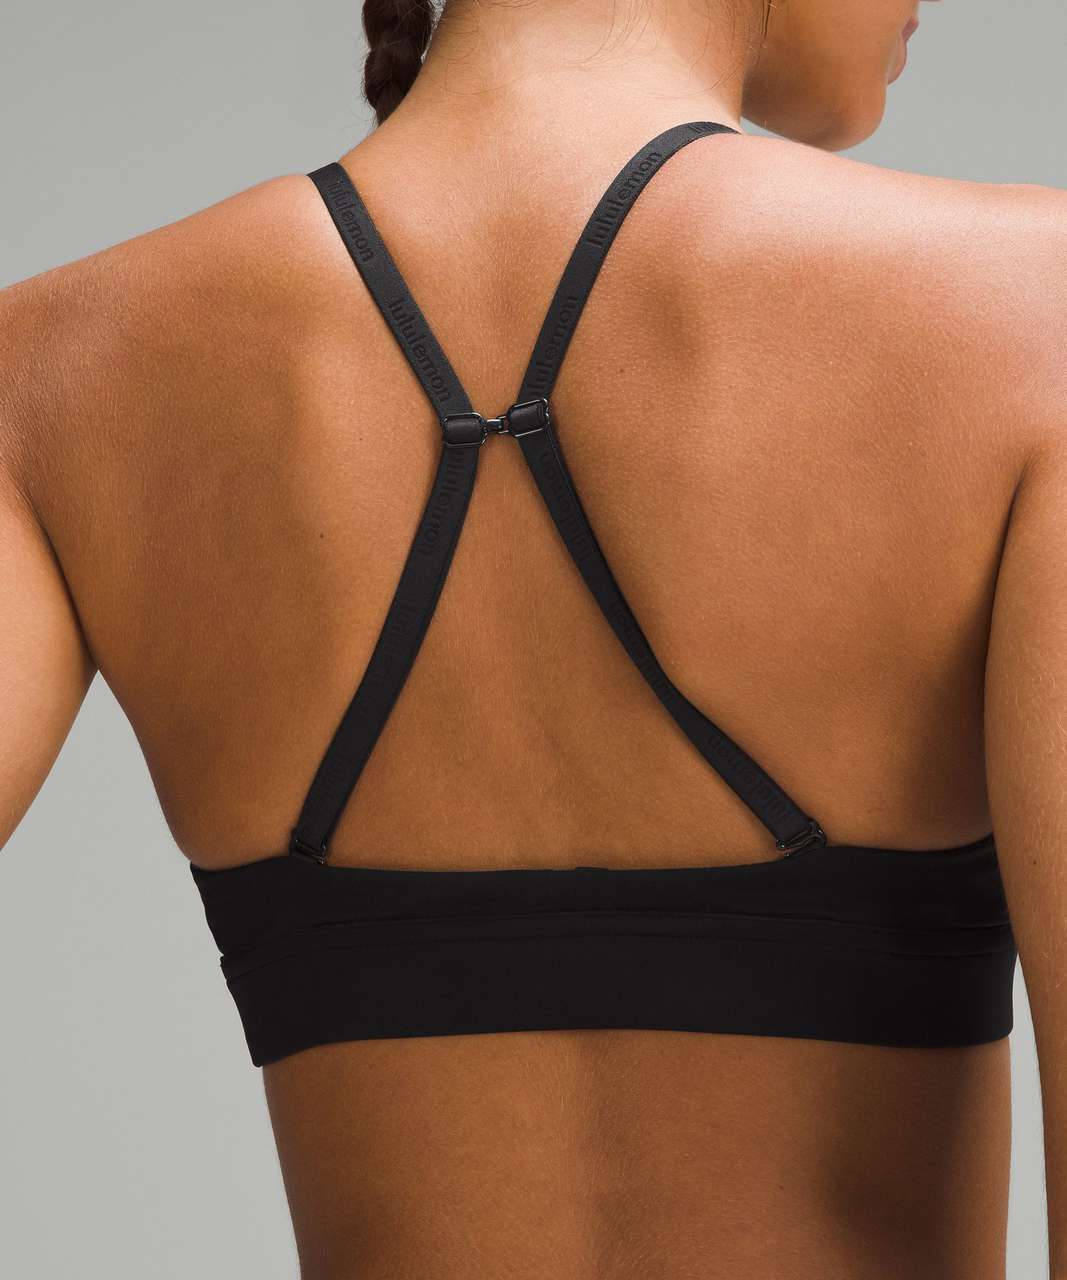 Lululemon License to Train Triangle Bra Light Support, A/B Cup *Logo - Black